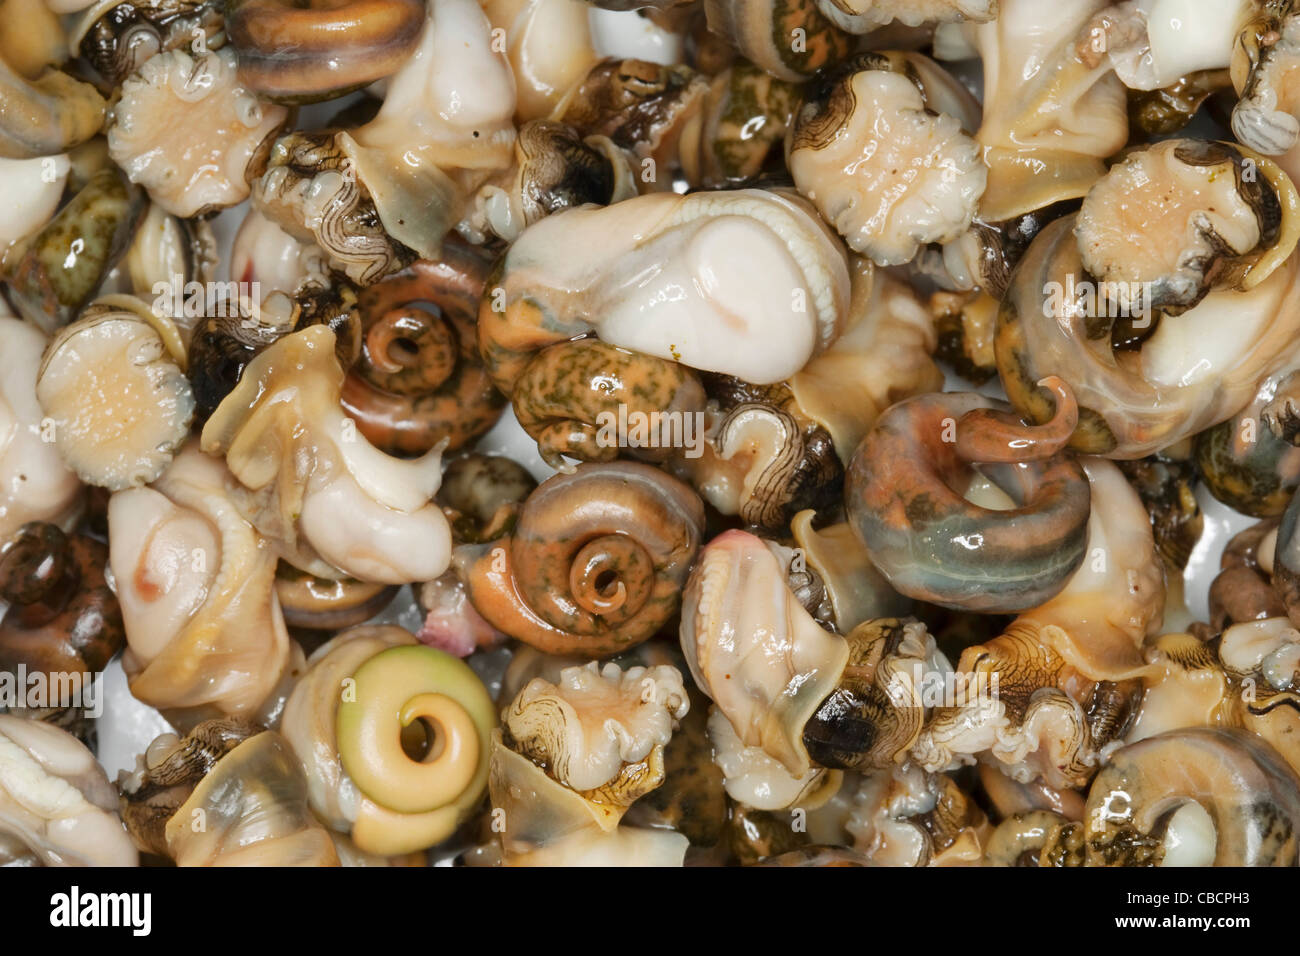 Cooked common periwinkles or winkles, scientific name Littorina Littorea,extracted from their shells Stock Photo